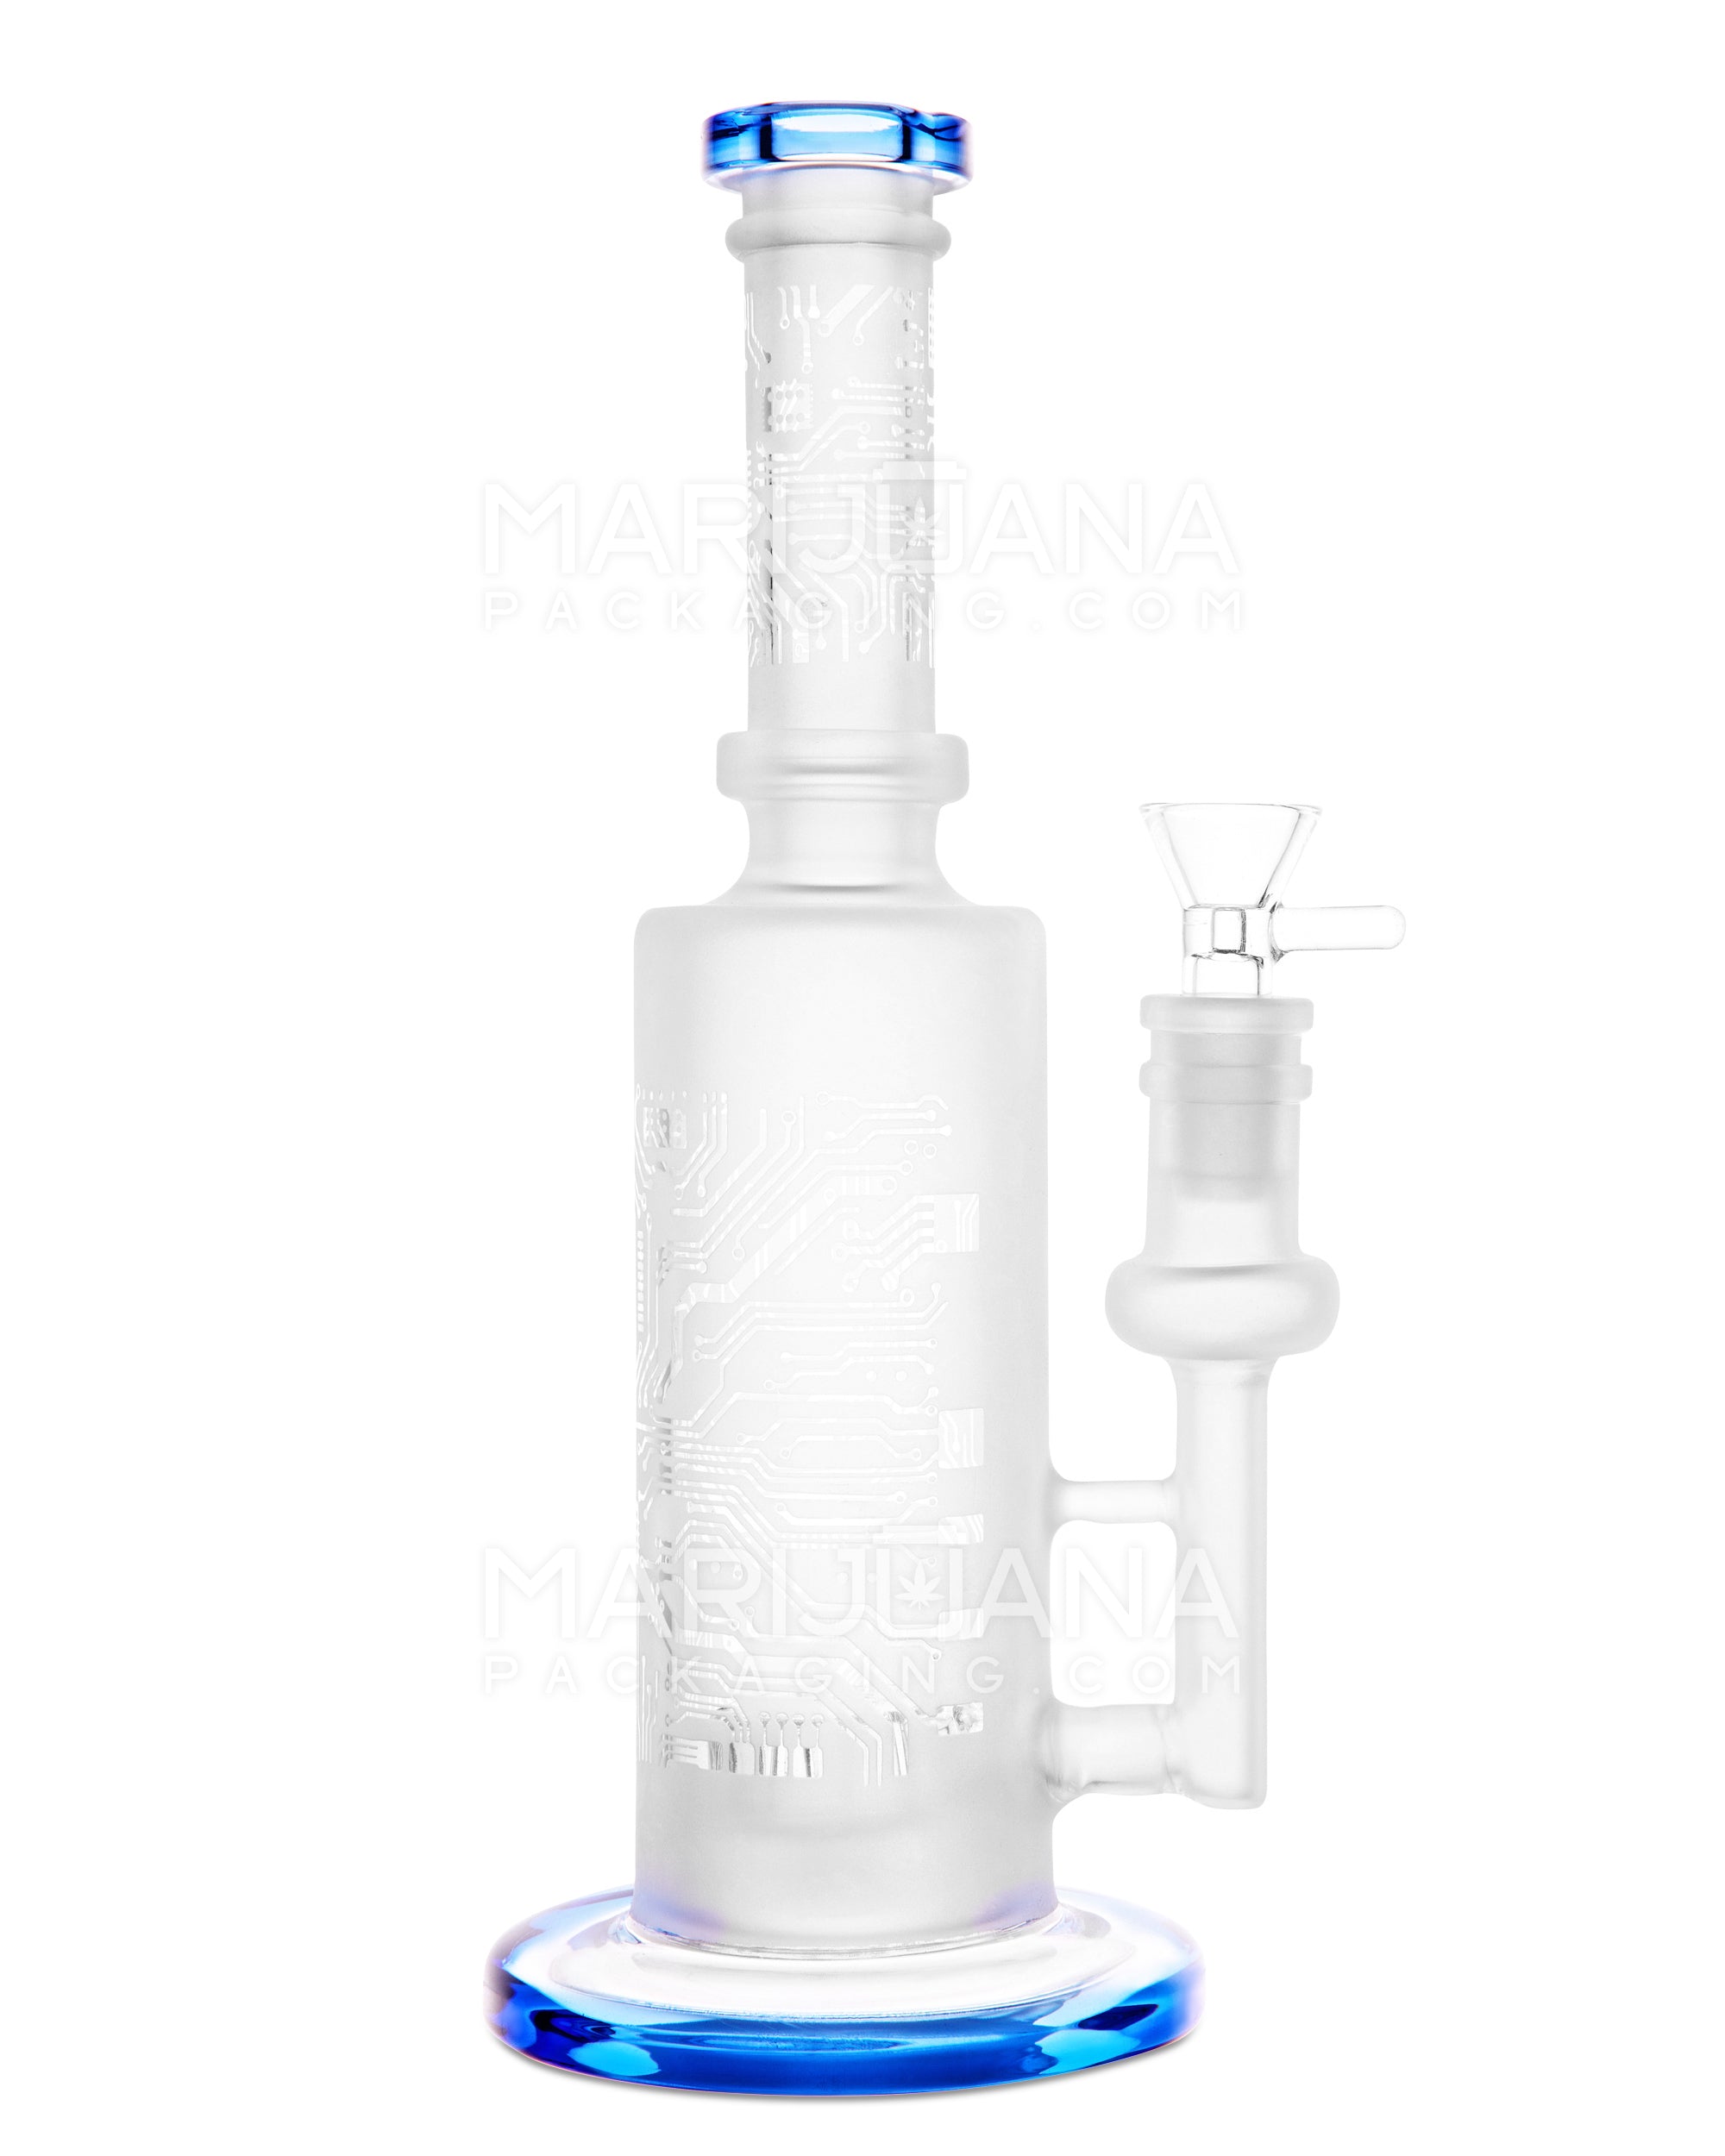 Straight Neck Sandblasted Circuitboard Showerhead Perc Glass Water Pipe w/ Thick Base | 9.5in Tall - 14mm Bowl - Blue - 1